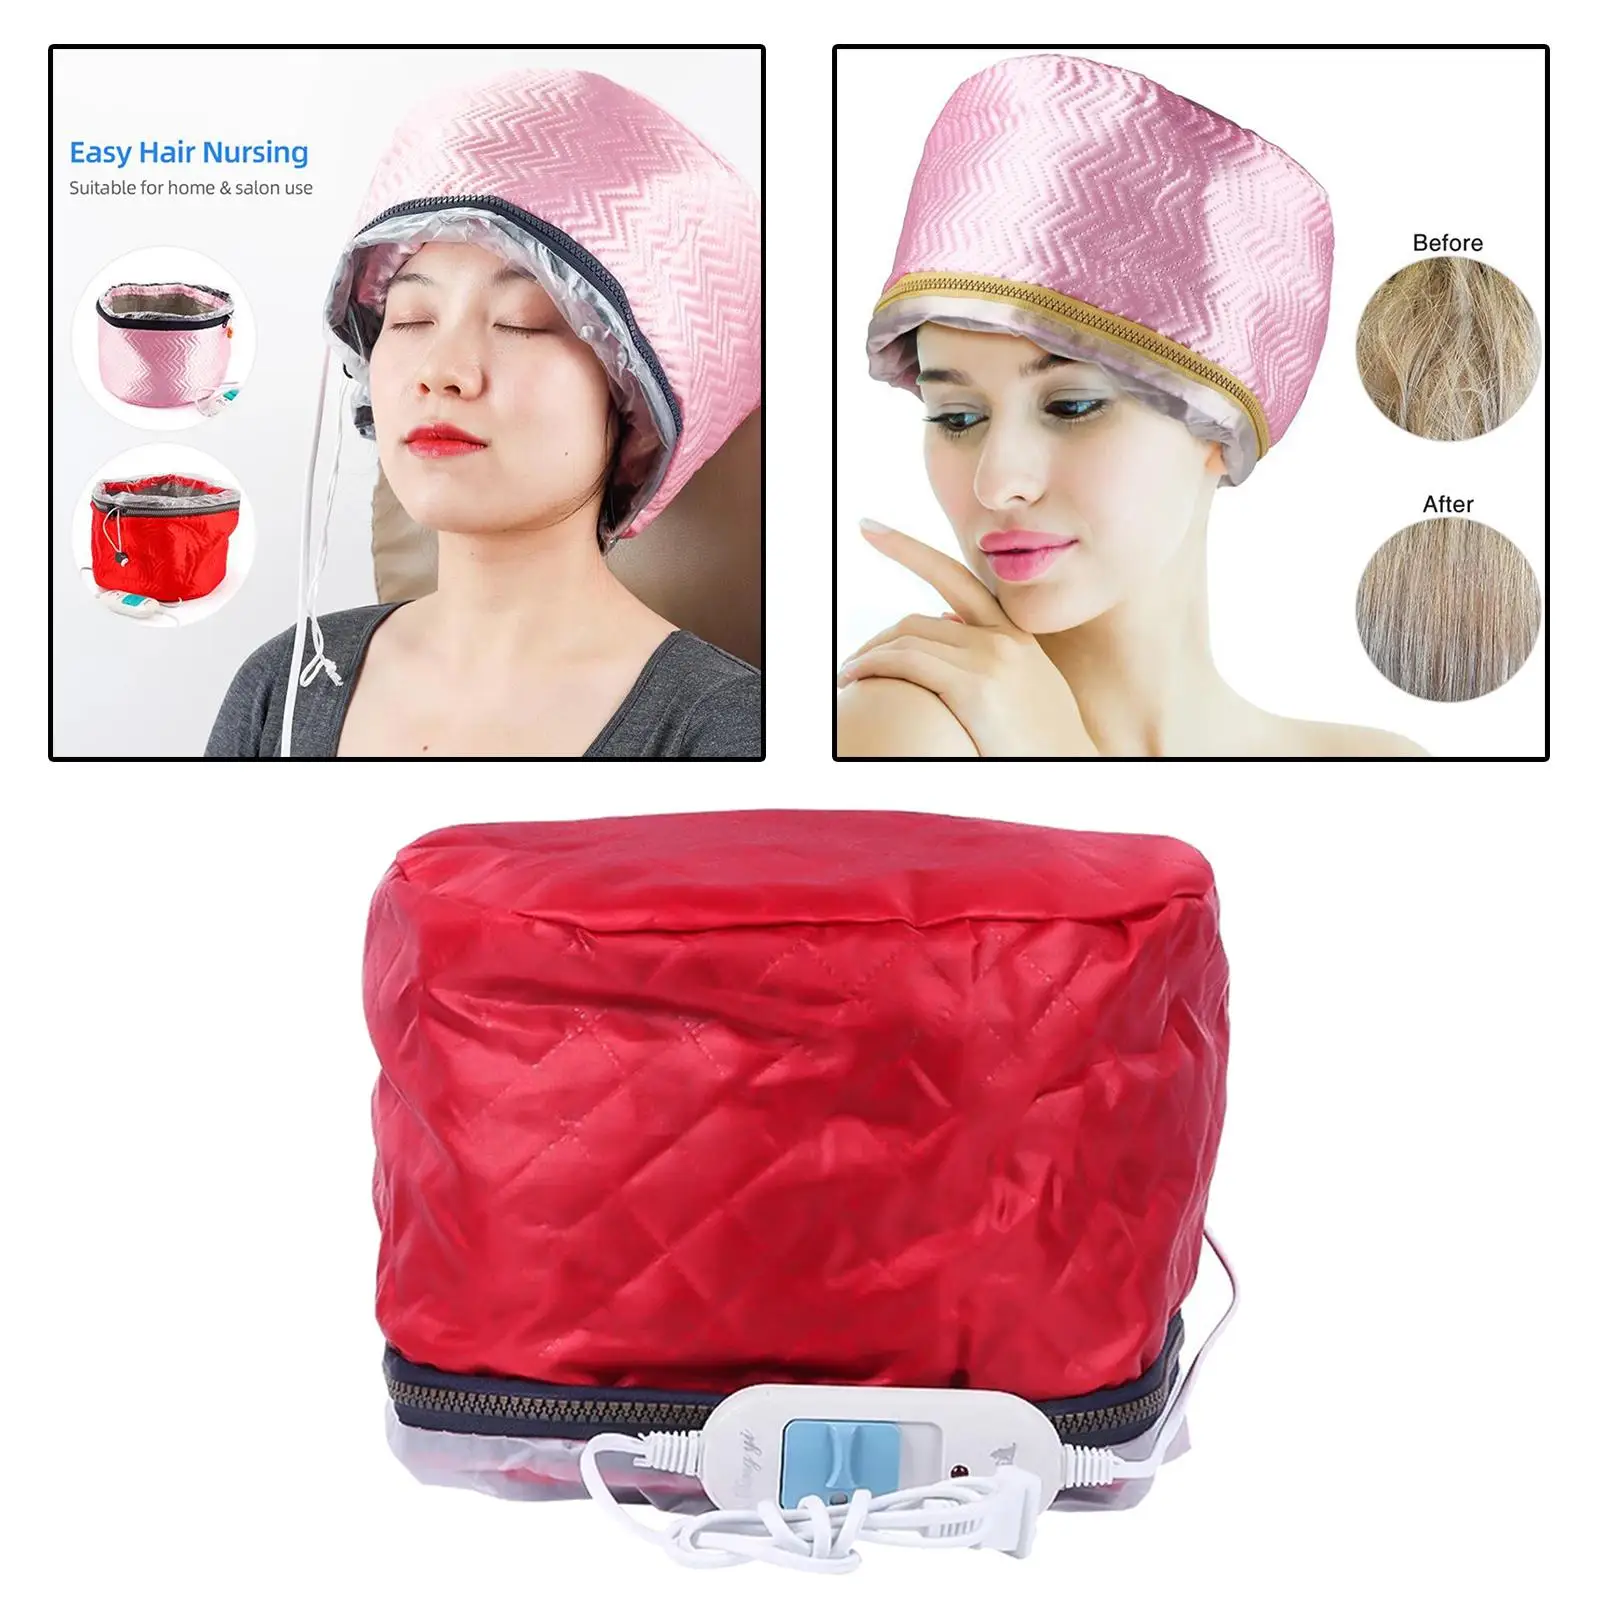 Hair Heating Caps Steamer 3-Modes Safe with Zipper Microwave Hot Caps for Deep Conditioning Salon Hot Head Care Hair SPA Travel